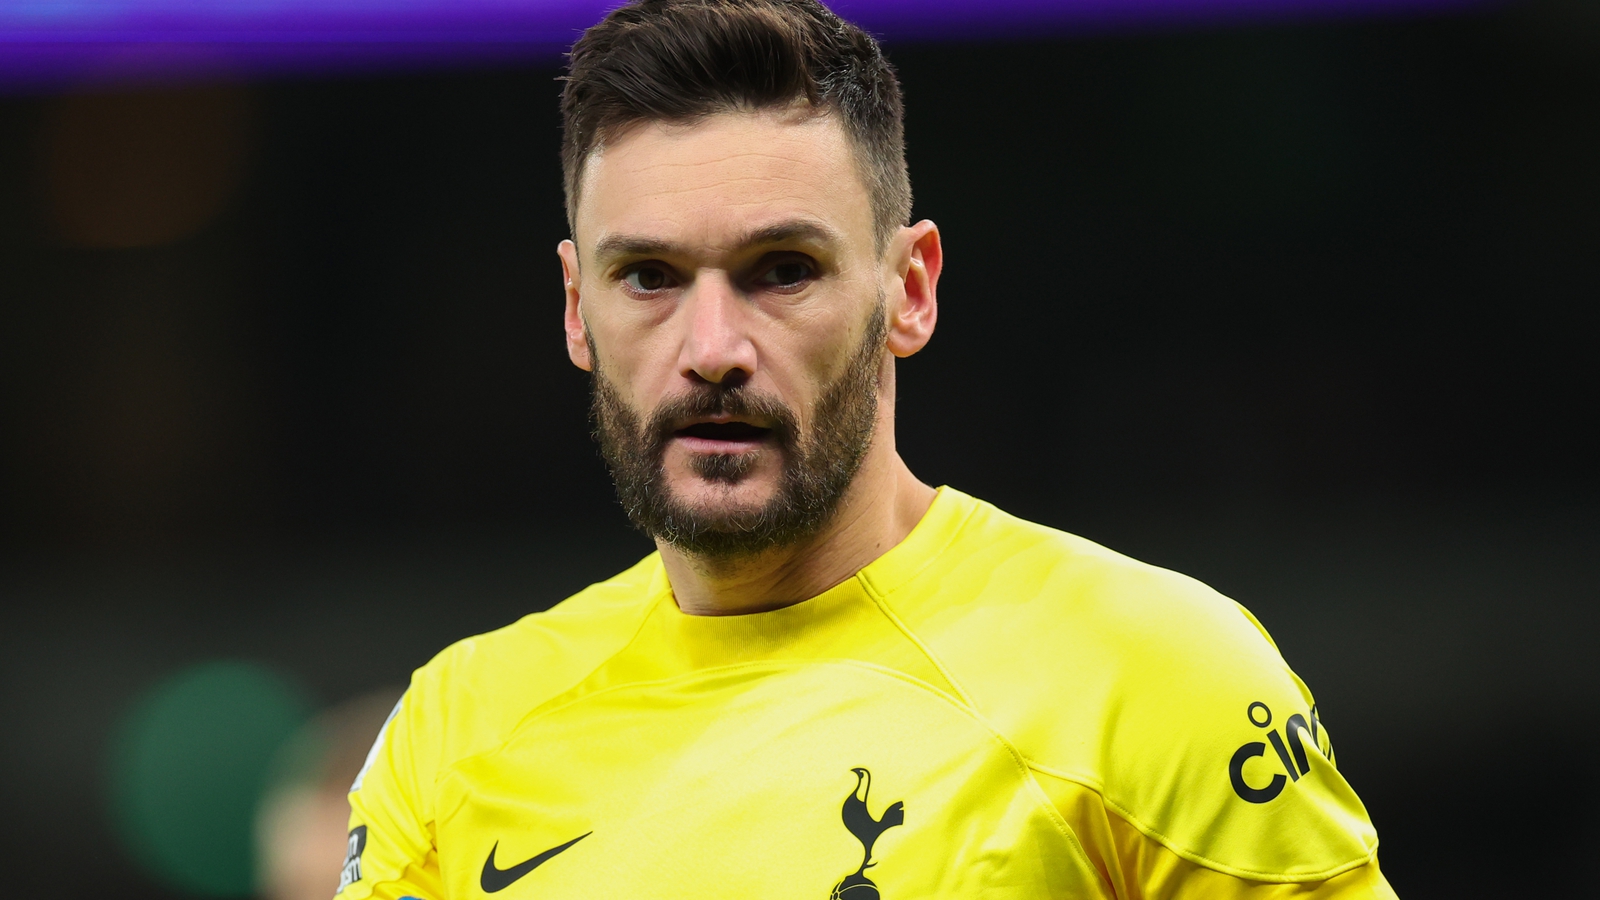 Hugo Lloris' new contract is next step in building feel-good